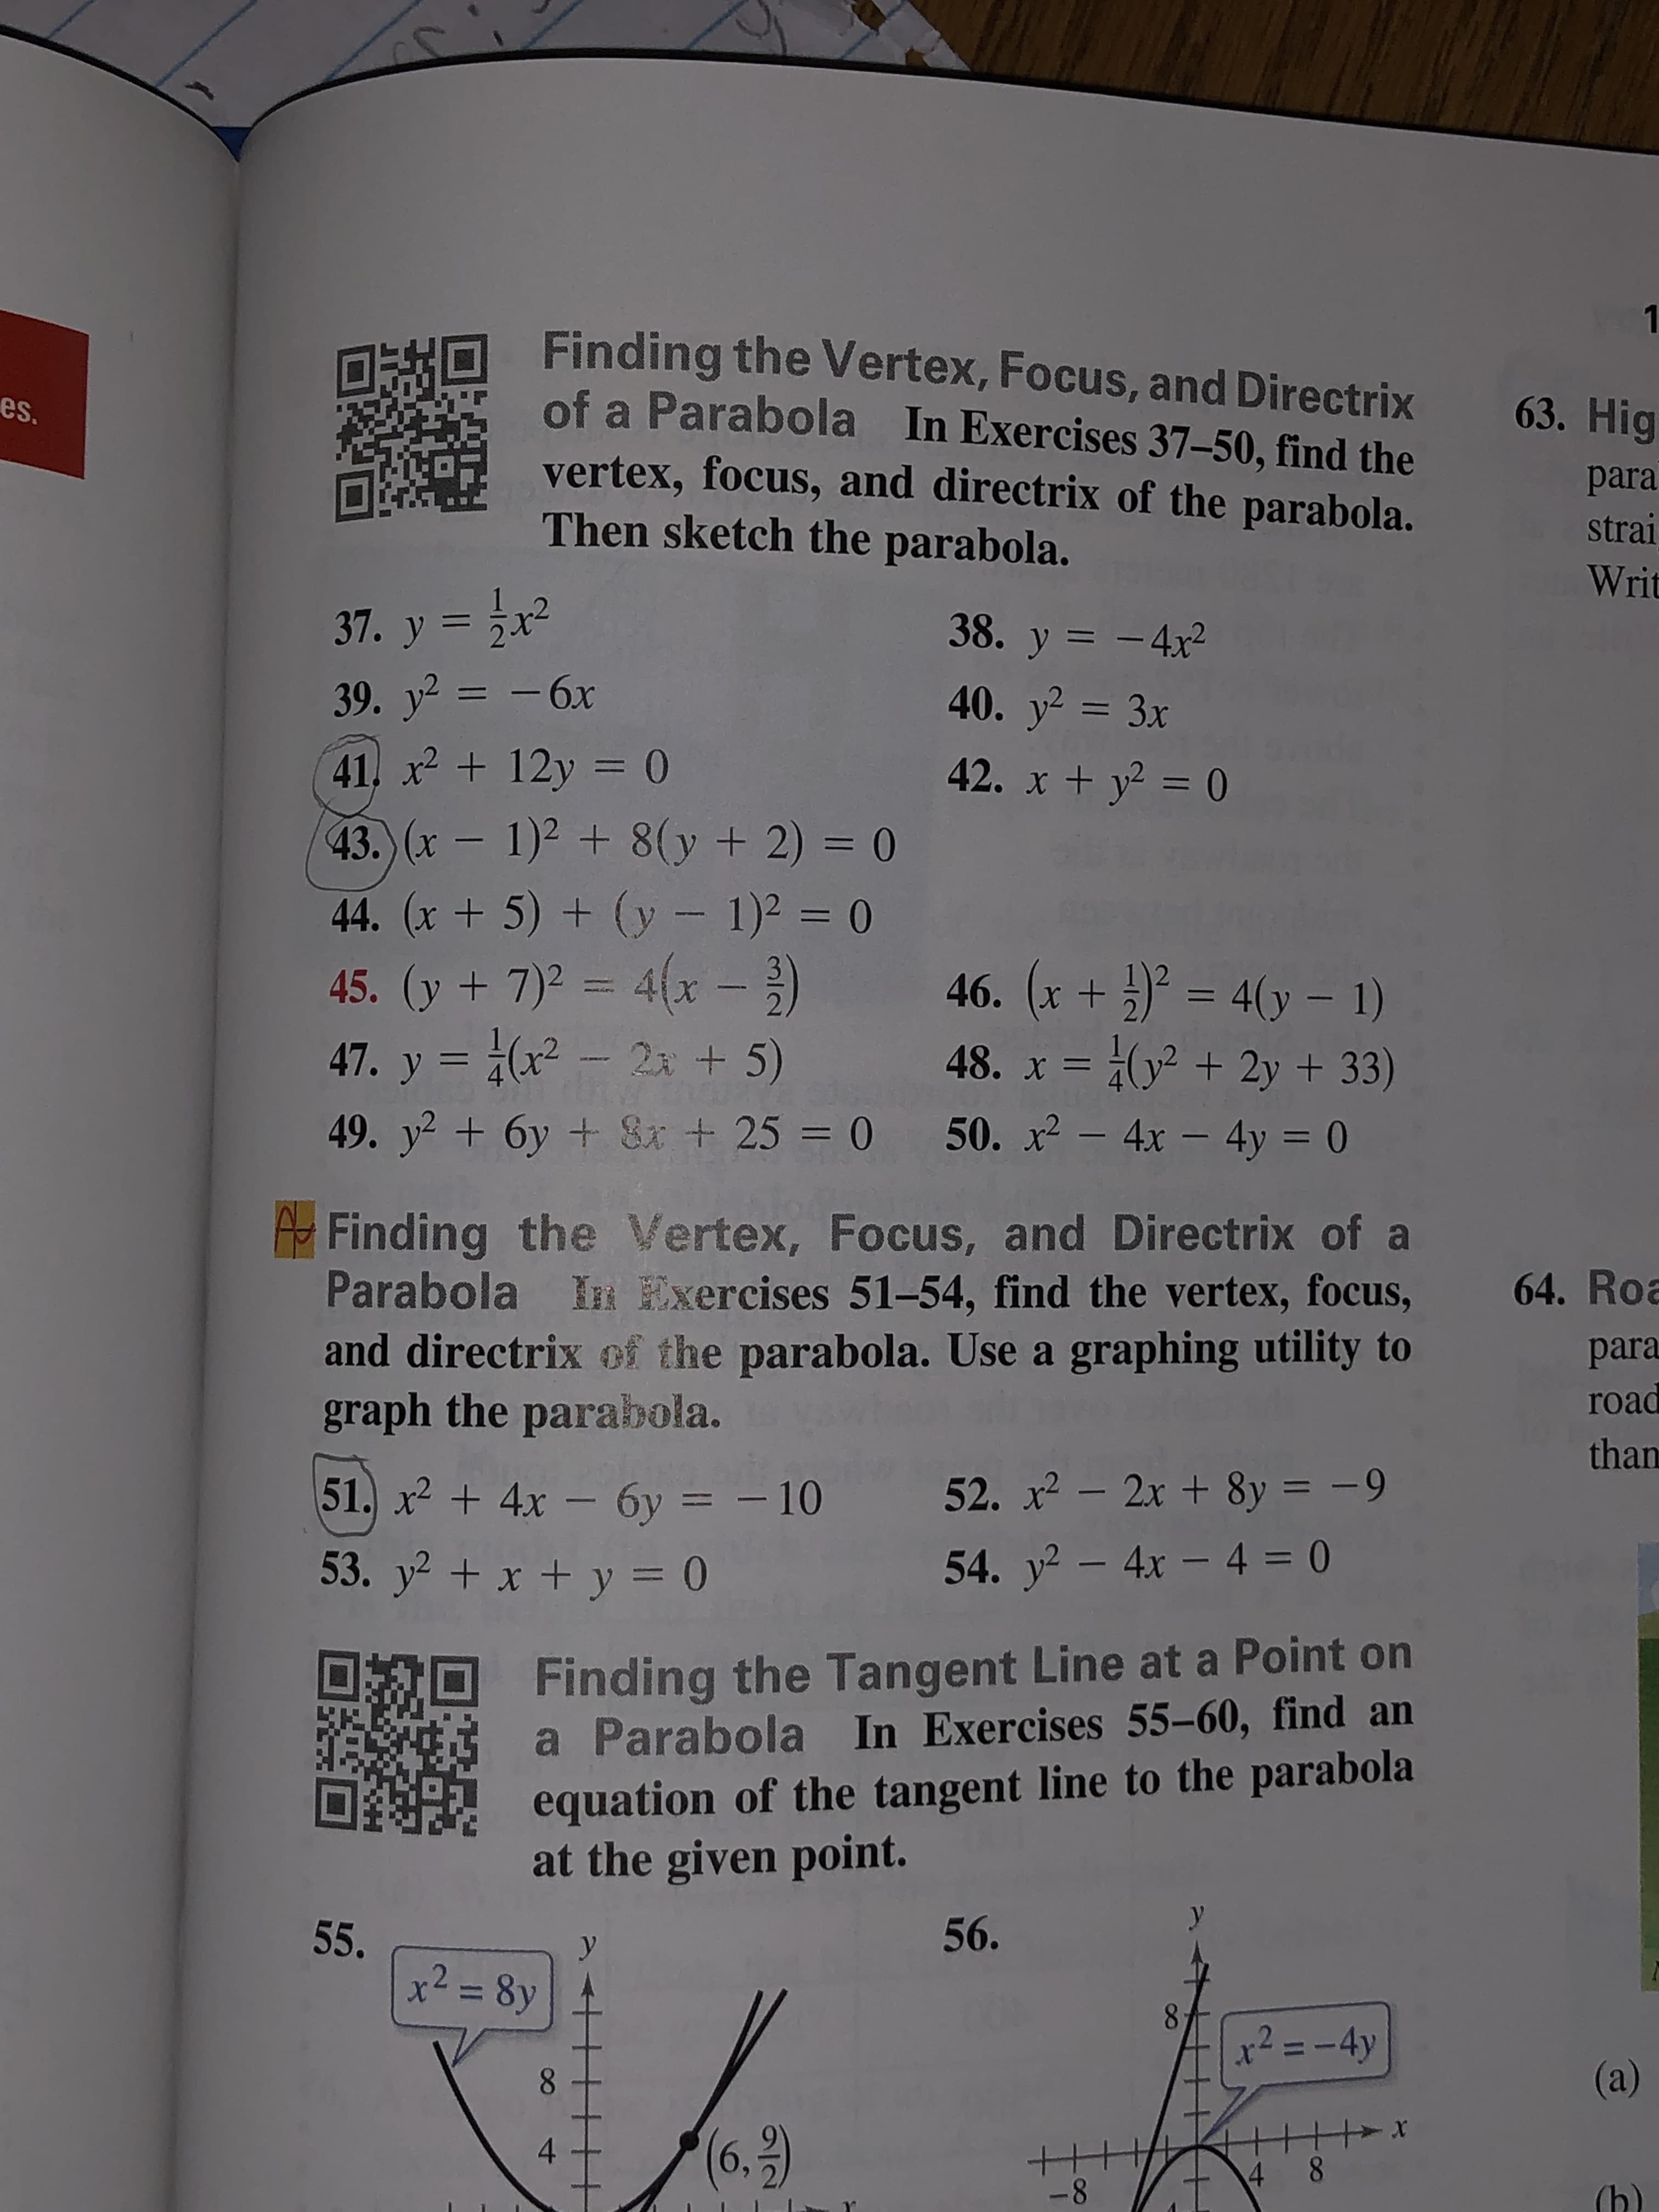 1
Finding the Vertex, Focus, and Directrix
of a Parabola In Exercises 37–50, find the
63. Hig
es.
vertex, focus, and directrix of the parabola.
Then sketch the parabola.
para
strai
Writ
37. y = x2
38. y = - 4x²
39. y2 = -6x
40. y = 3x
41. x2 + 12y = (0
42. x + y2 = 0
43. (x- 1)2 + 8(y+ 2) = 0
44. (x + 5) + (y - 1)2 = 0
45. (y + 7)2 = 4(x )
47. y = (x - 2 + 5)
46. (x + ) = 4(y – 1)
3
48. x = (y² + 2y + 33)
MEWMER
49. y? + 6y + Si + 25 = 0
50. x2 - 4x – 4y = 0
Finding the Vertex, Focus, and Directrix of a
Parabola In Exercises 51-54, find the vertex, focus,
and directrix of the parabola. Use a graphing utility to
graph the parabola.
64. Roa
para
road
than
51. x2 + 4x - 6y = – 10
52. x - 2x + 8y = -9
53. y2 + x + y = 0
54. y - 4x - 4 = 0
Finding the Tangent Line at a Point on
a Parabola In Exercises 55-60, find an
equation of the tangent line to the parabola
at the given point.
56.
55.
x² = 8y
%3D
8.
x² =-4y
(a)
(6,9)
4 8
-8
(h)
4-
